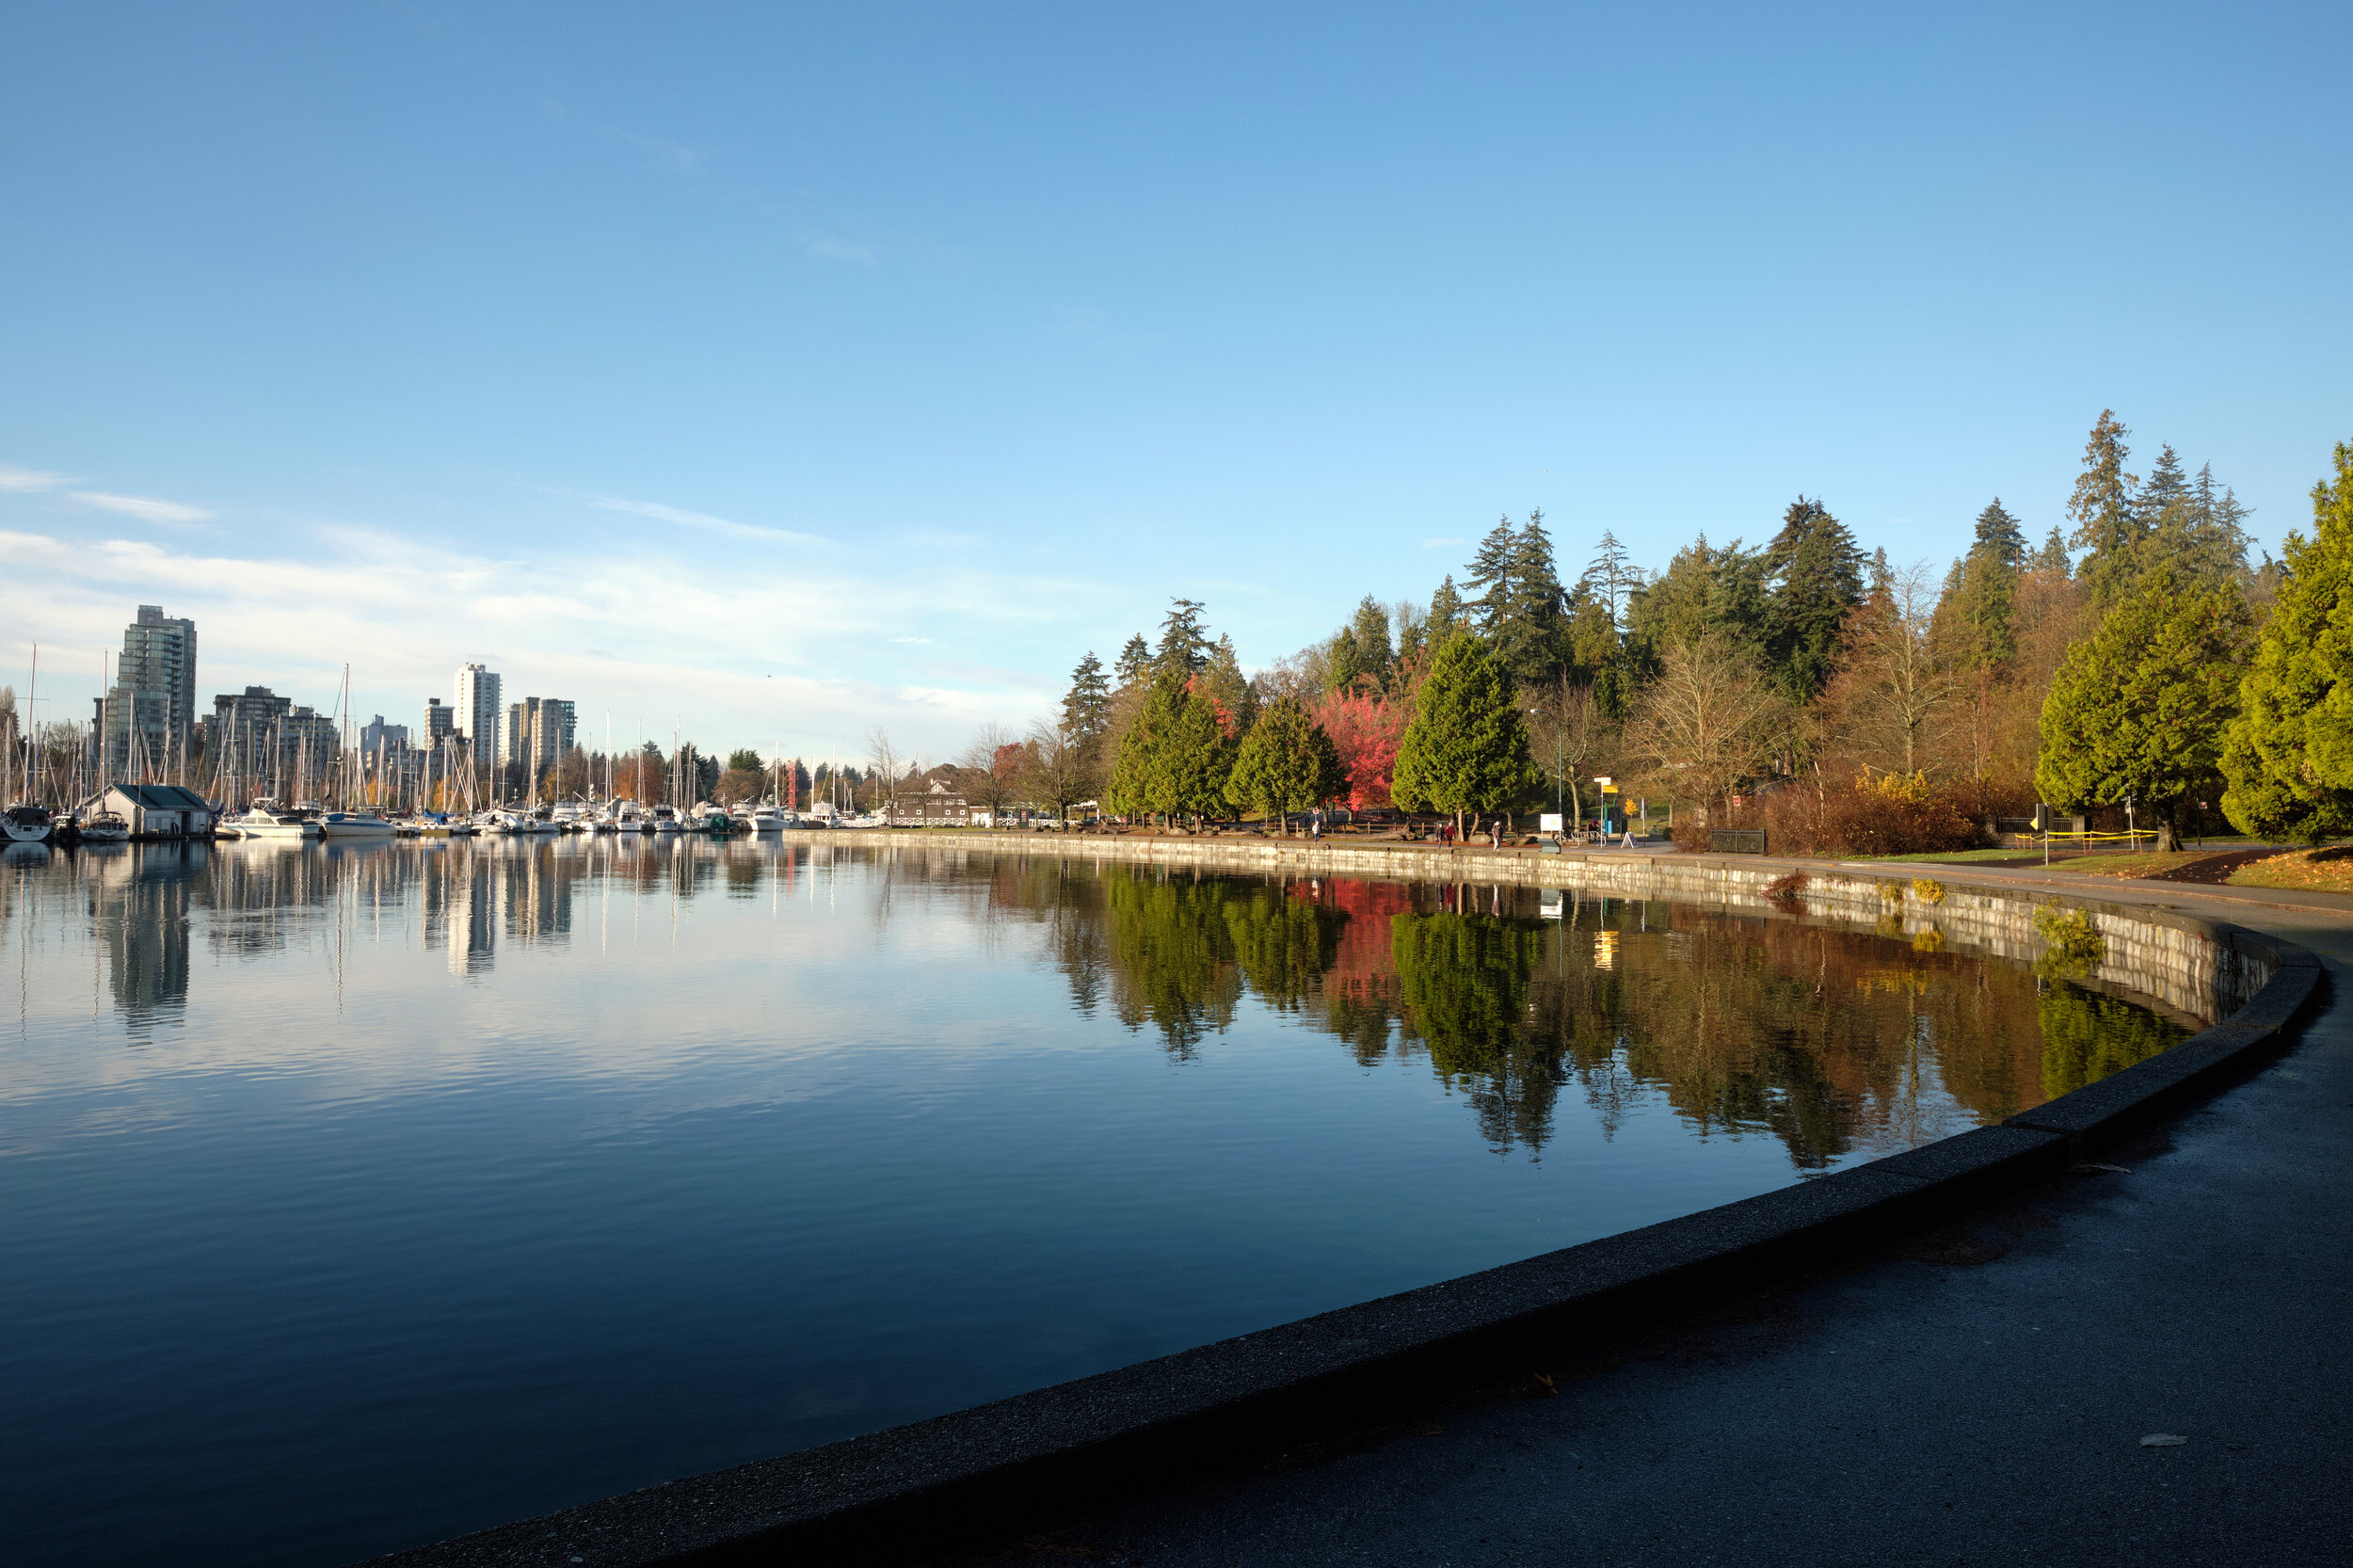 Morning light and blue skies on a November morning at Coal Harbour along the Stanley Park Seawall in Vancouver